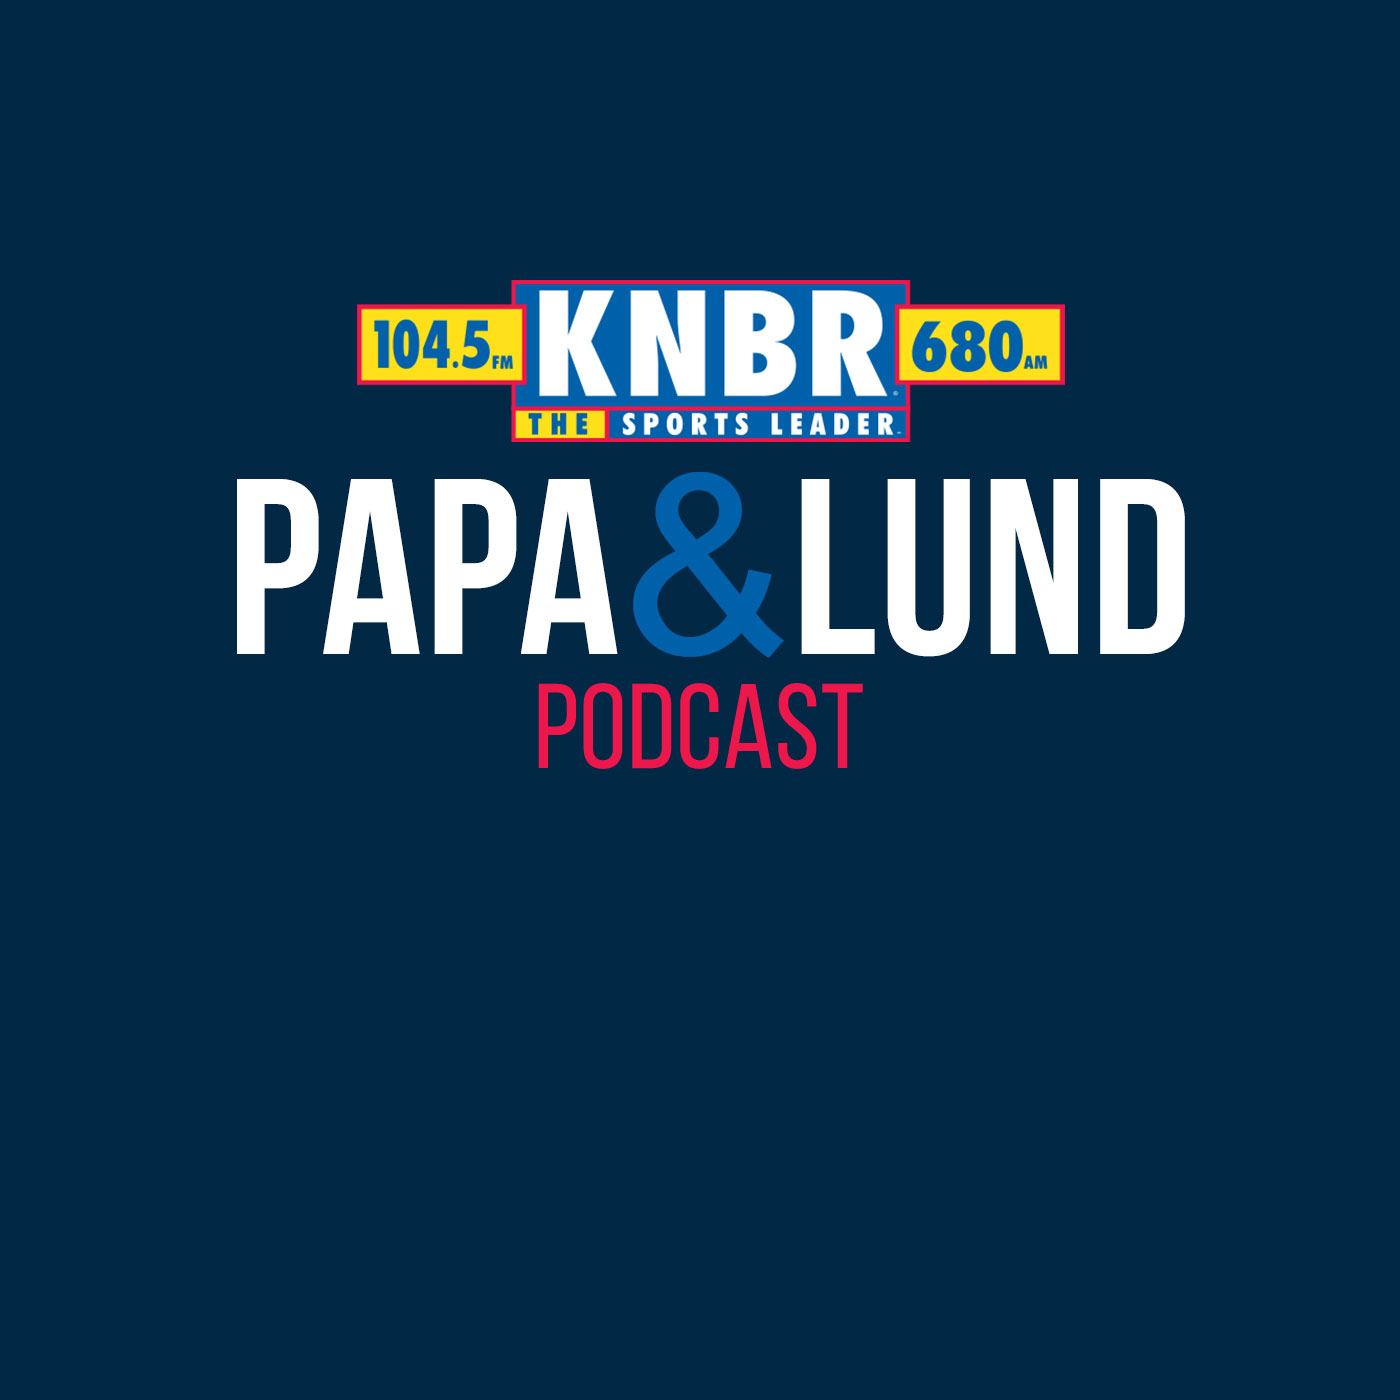 2-8 Mike Golic joins Papa & Lund LIVE from Media Row to discuss how the winner of the Superbowl will be decided in the trenches